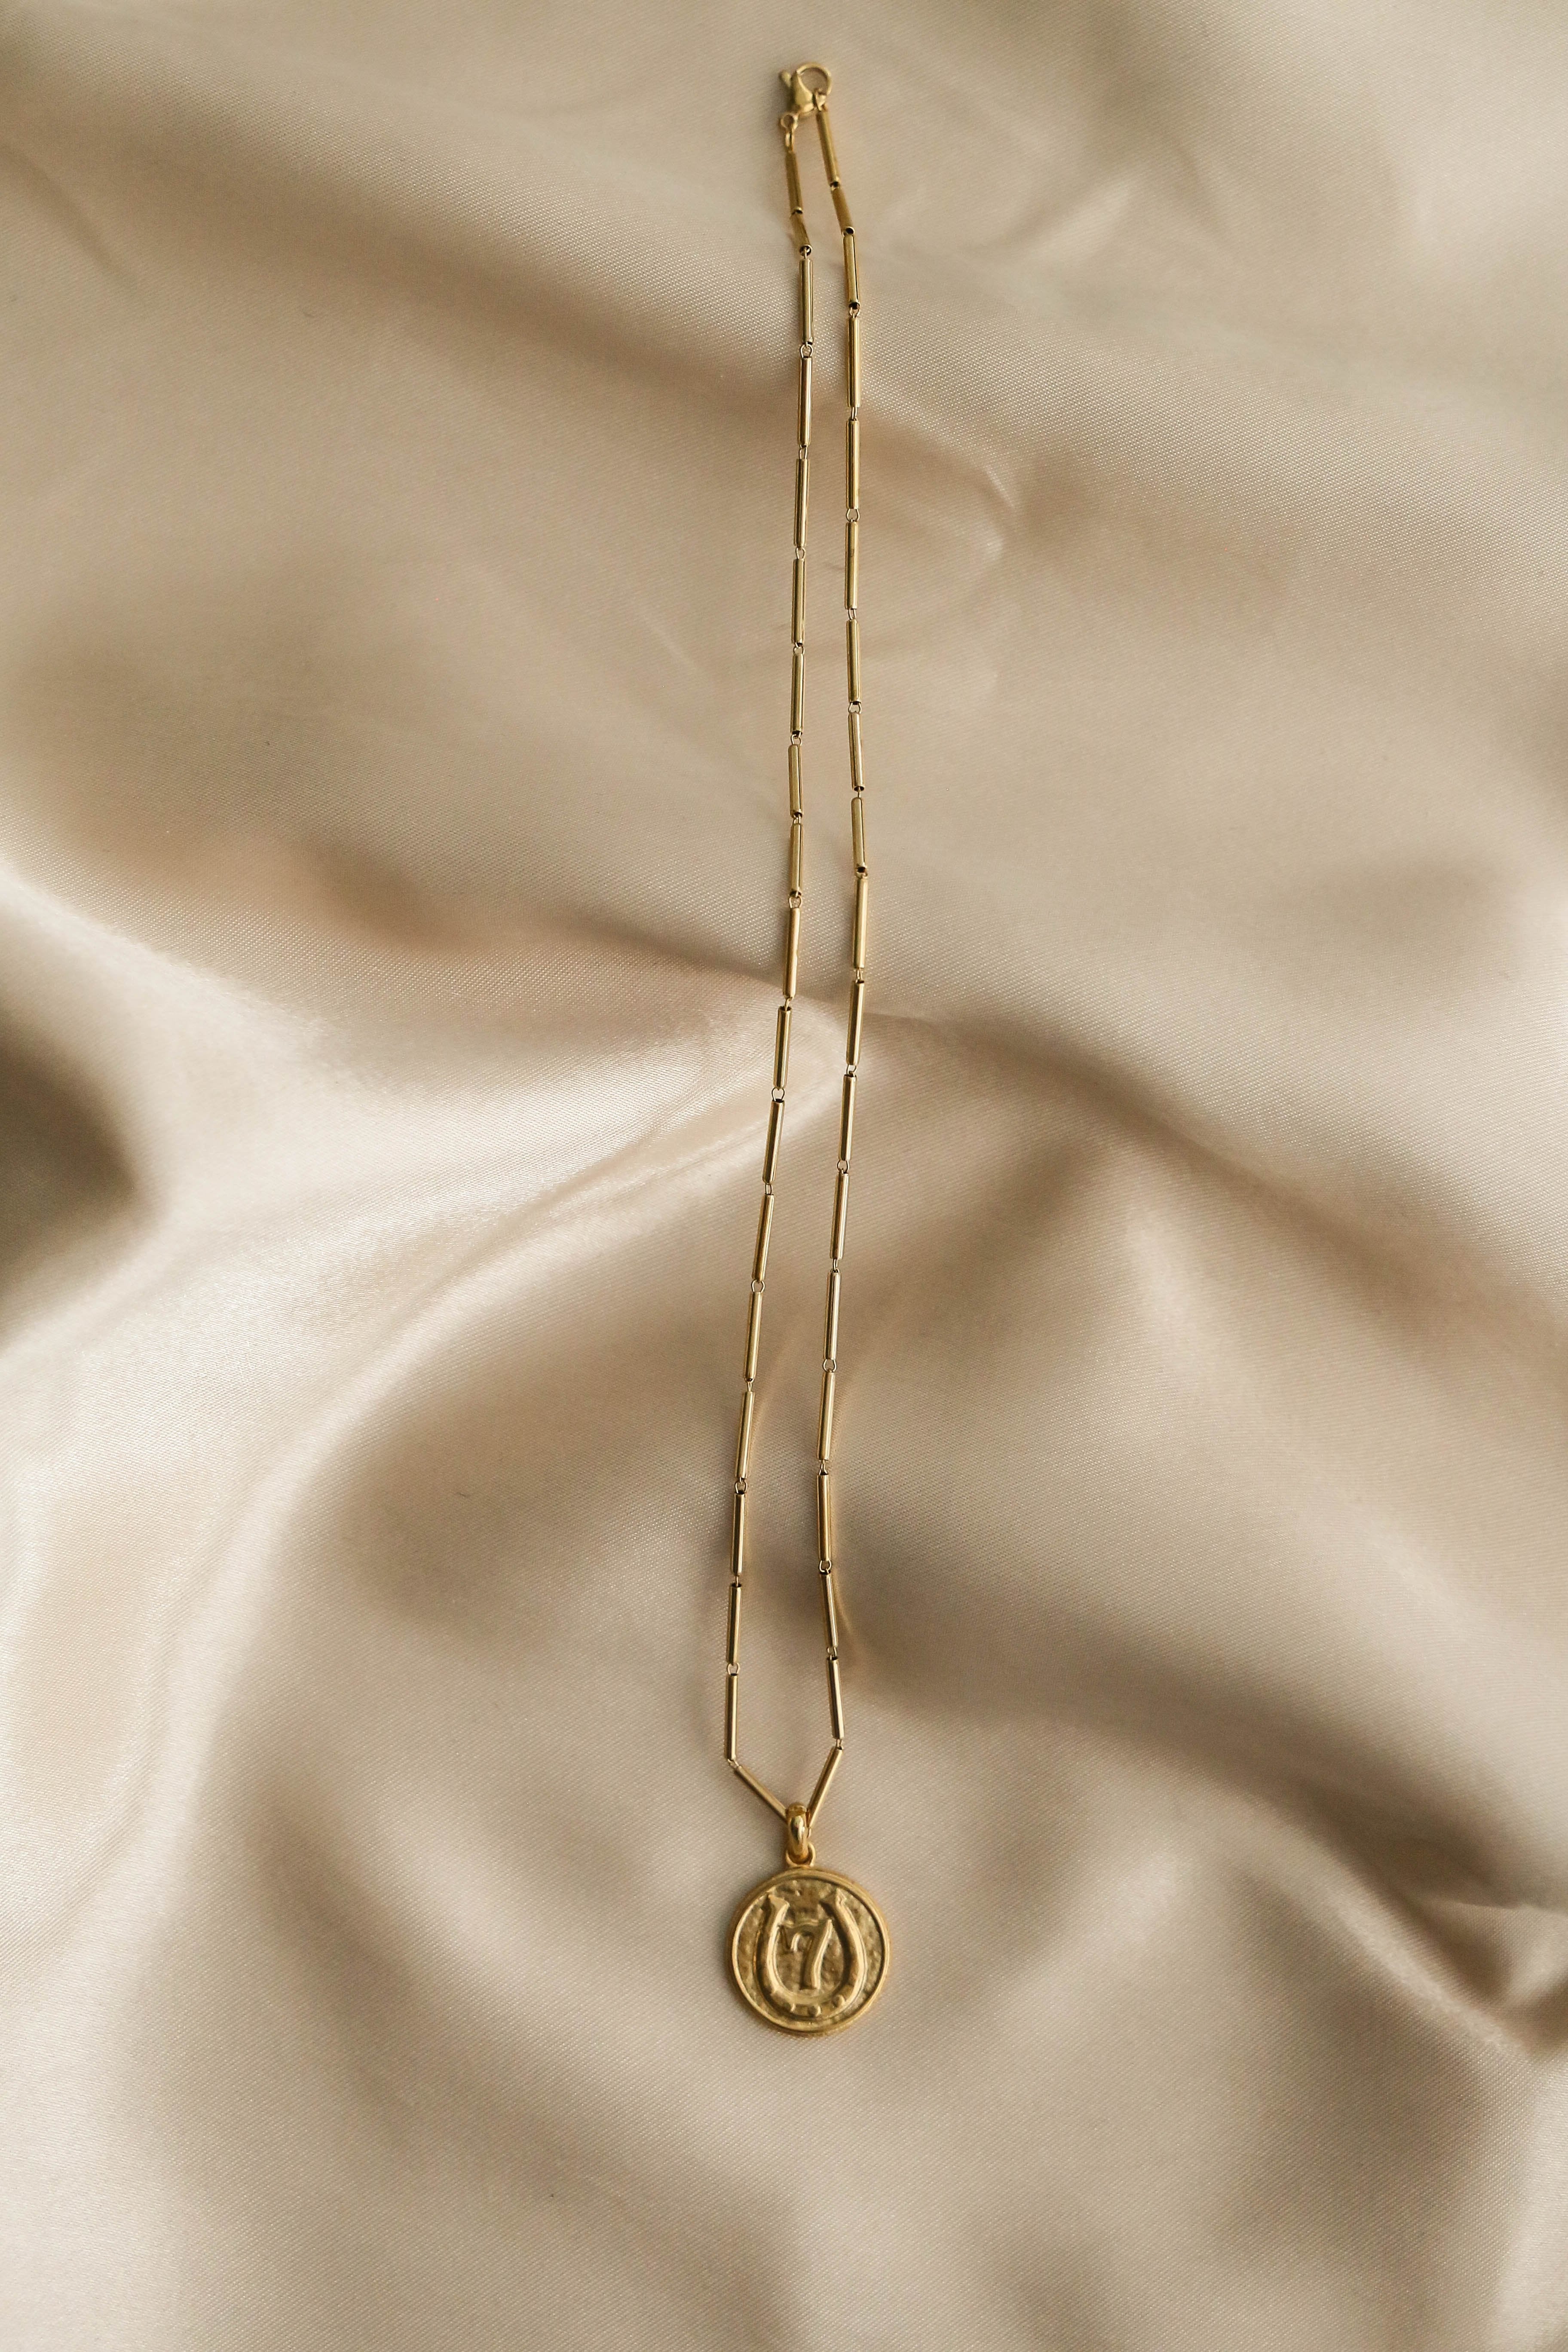 'Lucky Me' Necklace - Boutique Minimaliste has waterproof, durable, elegant and vintage inspired jewelry